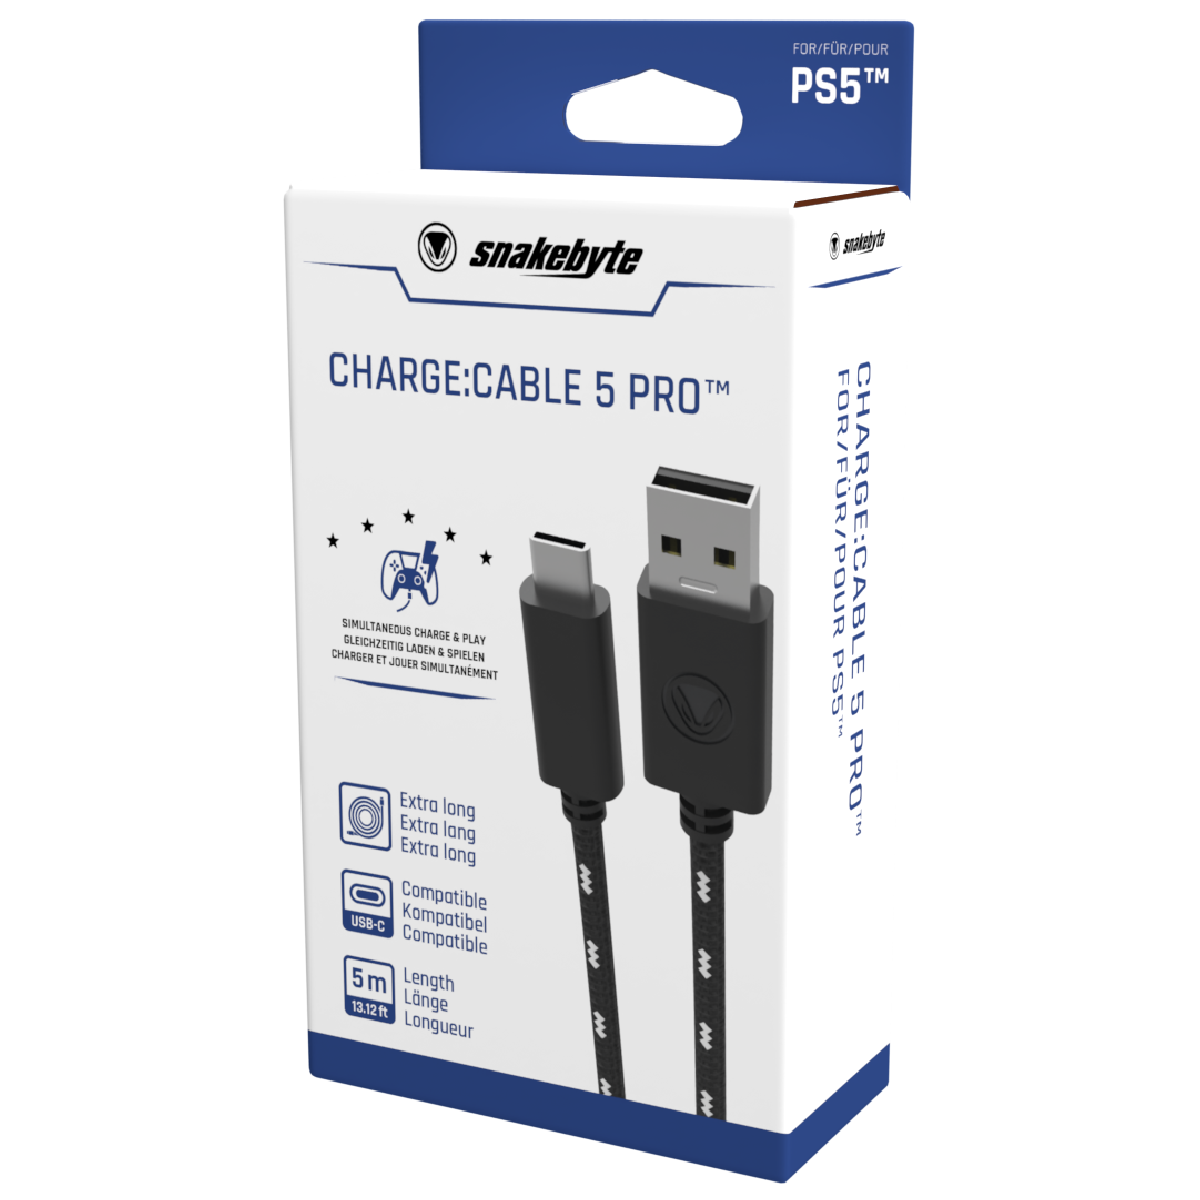 CHARGE:CABLE 5 PRO